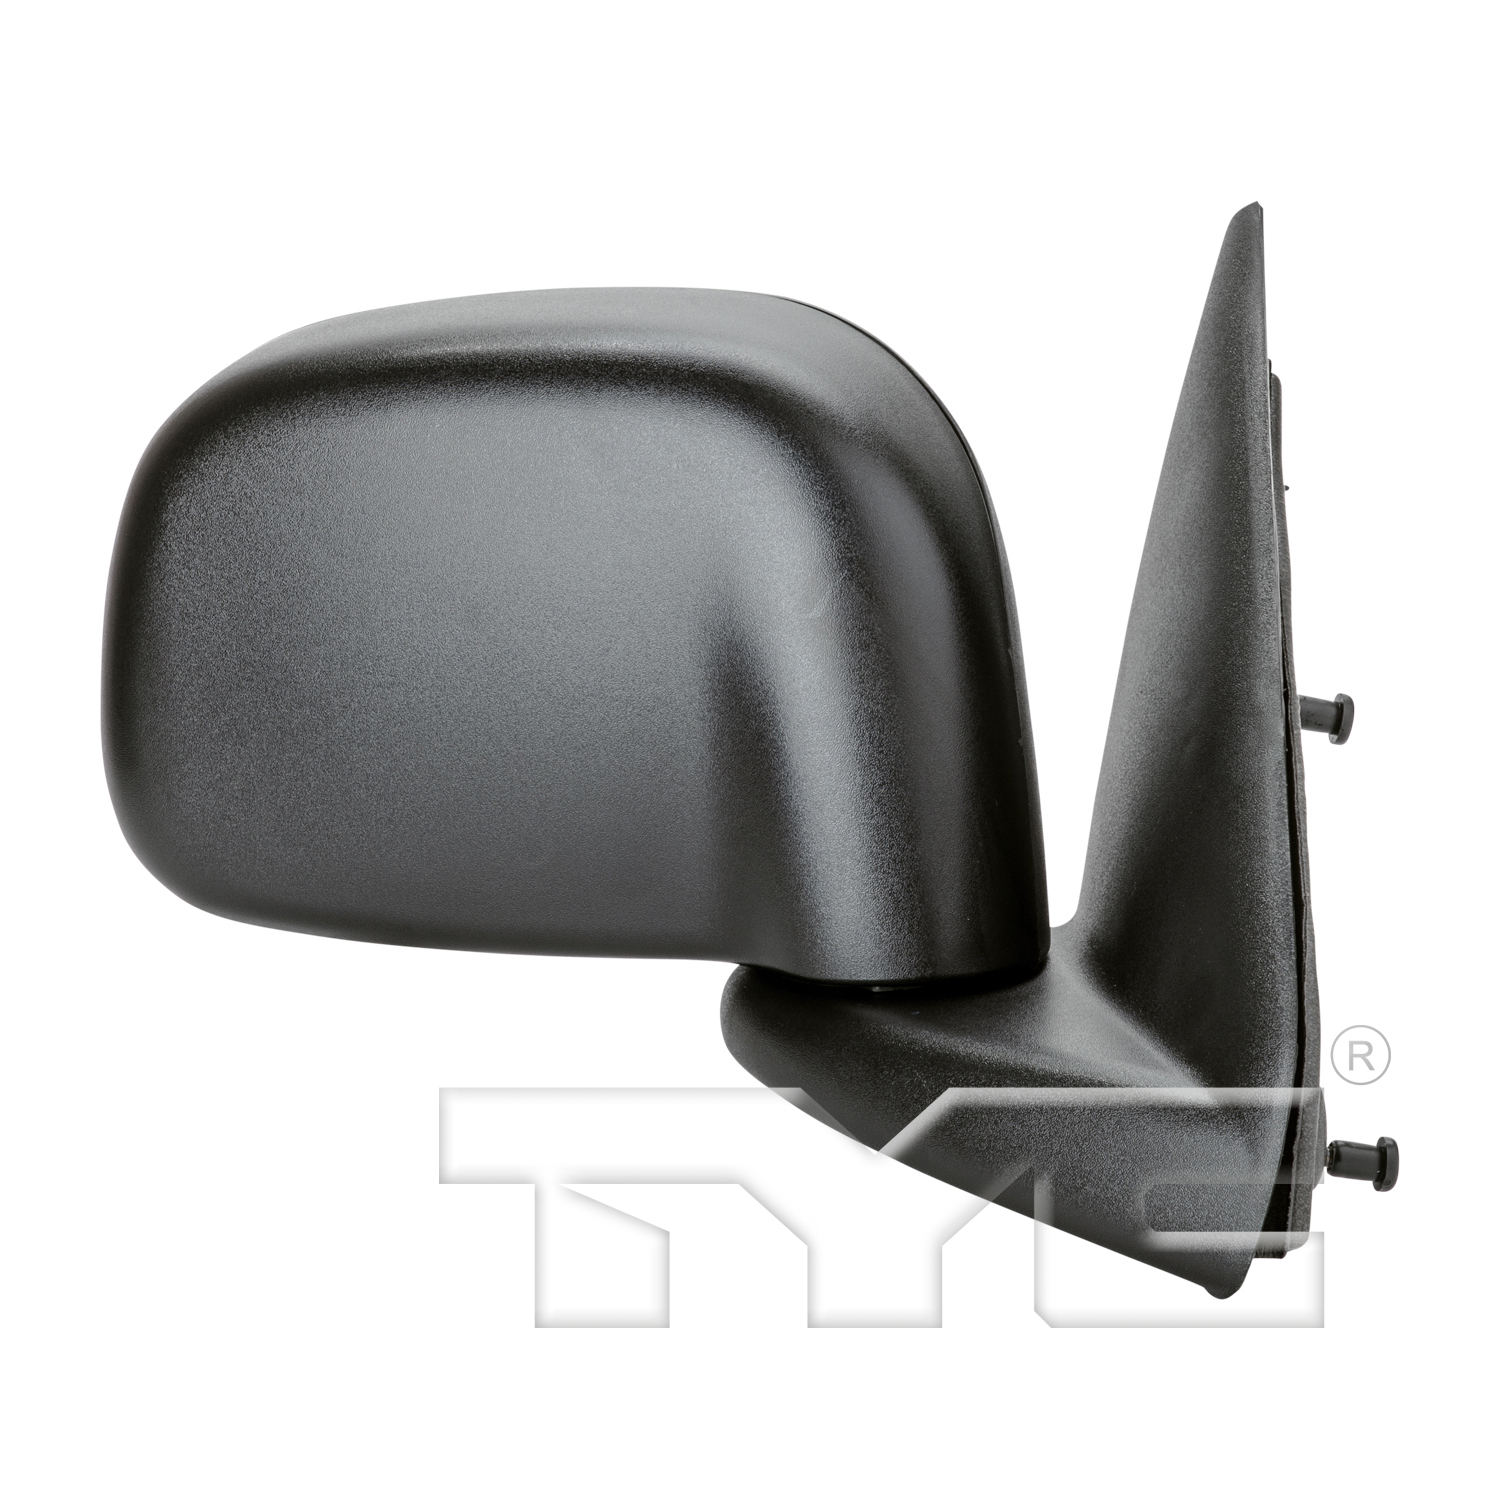 Aftermarket MIRRORS for DODGE - RAM 1500, RAM 1500,02-08,RT Mirror outside rear view